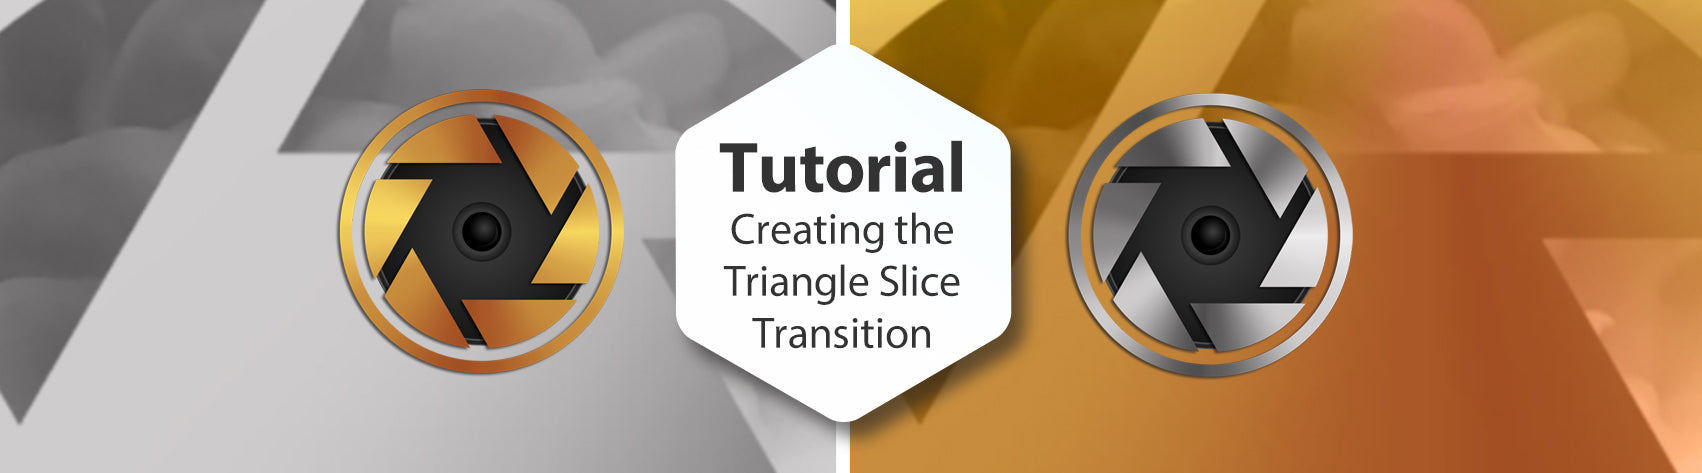 Creating the Triangle Slice Transition